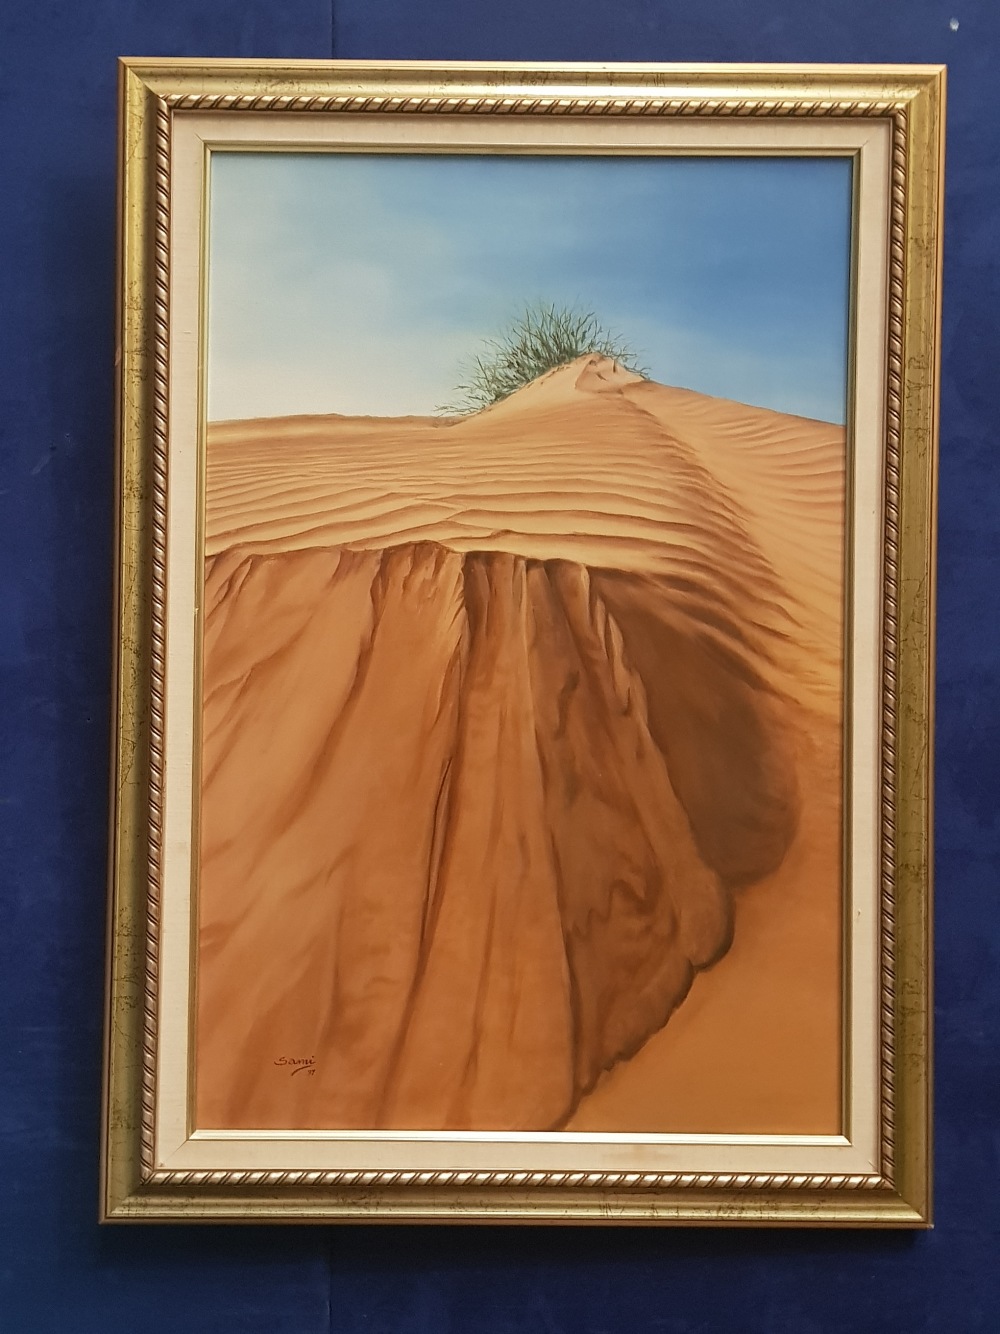 SAMI, "SAND DUNES", oil on canvas, signed lower left, dated 97, 29.5" x 20" approx. canvas, 35" x